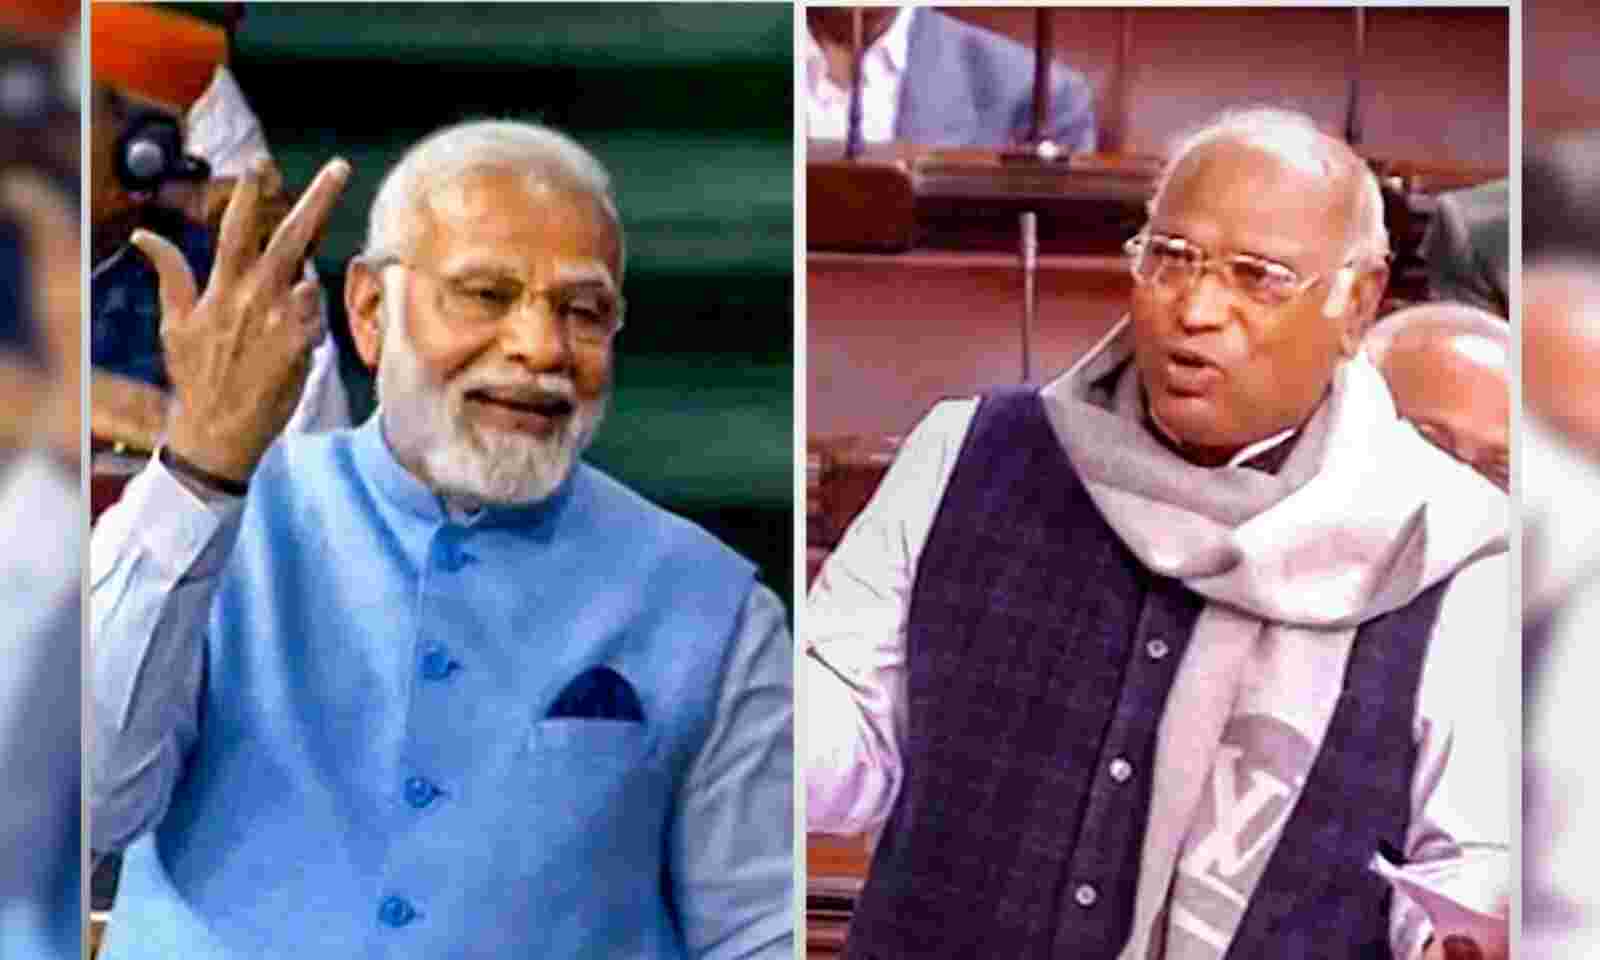 BALA on X: Kharge is questioning other people's income and he himself is  wearing Louis Vuitton Muffler worth Rs 56,000. Hypocrisy!   / X